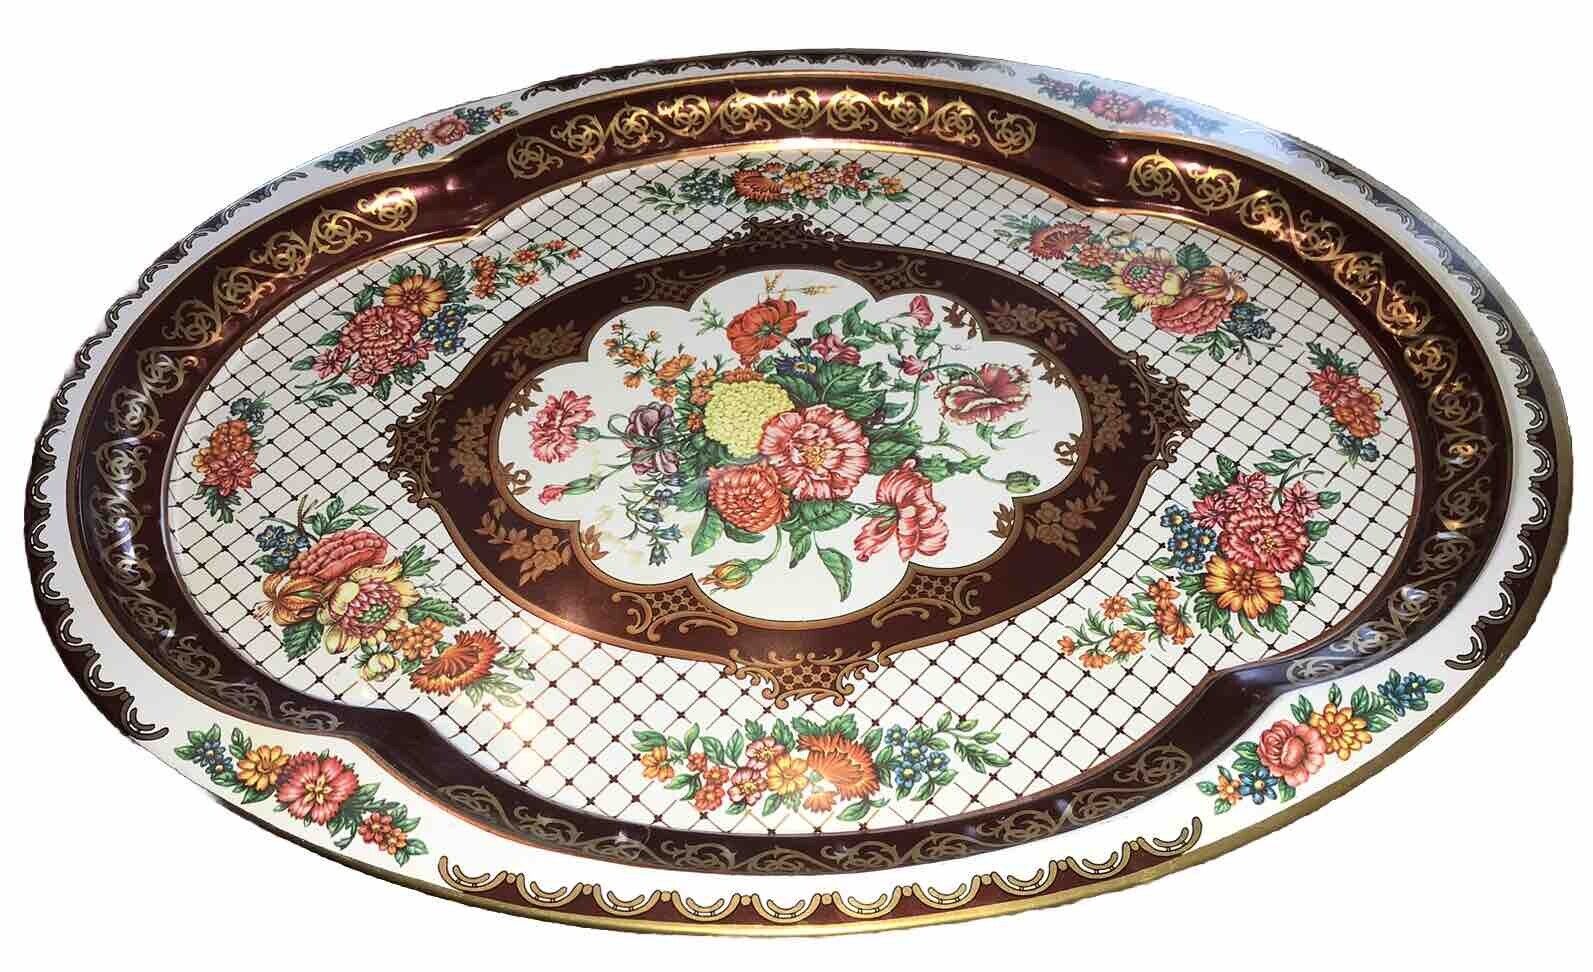 VINTAGE 1971 DAHER DECORATED WARE ENGLAND LARGE 20X15” OVAL FLORAL TIN TRAY VGUC